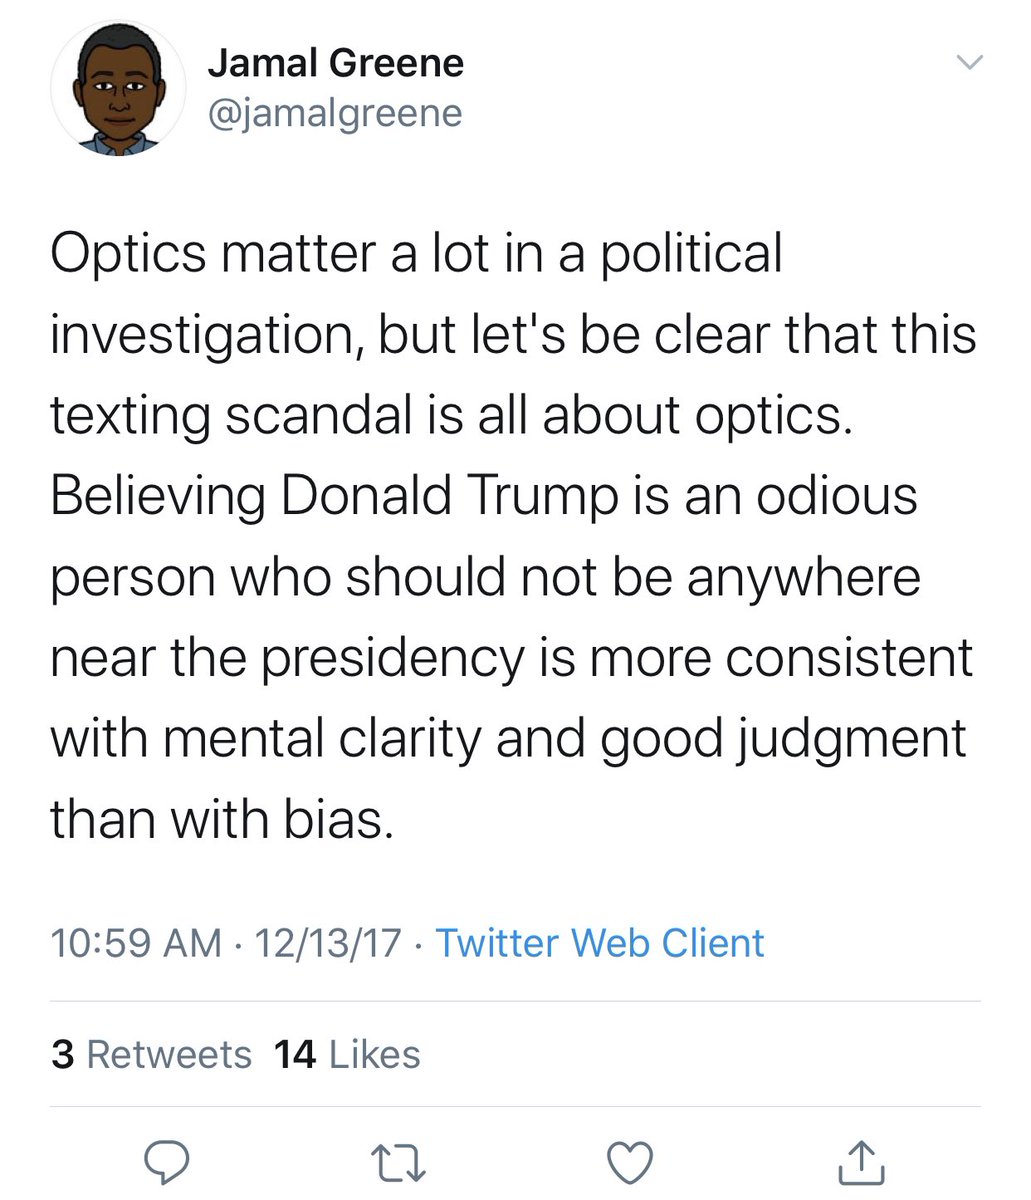 8. Folks, this is from a few minutes worth of review. And there’s much more on him.Jamal Greene - a guy Facebook wants filtering your posts - says it shows “mental clarity and good judgment” to believe Trump is an “odious person who should not be anywhere near the presidency.”